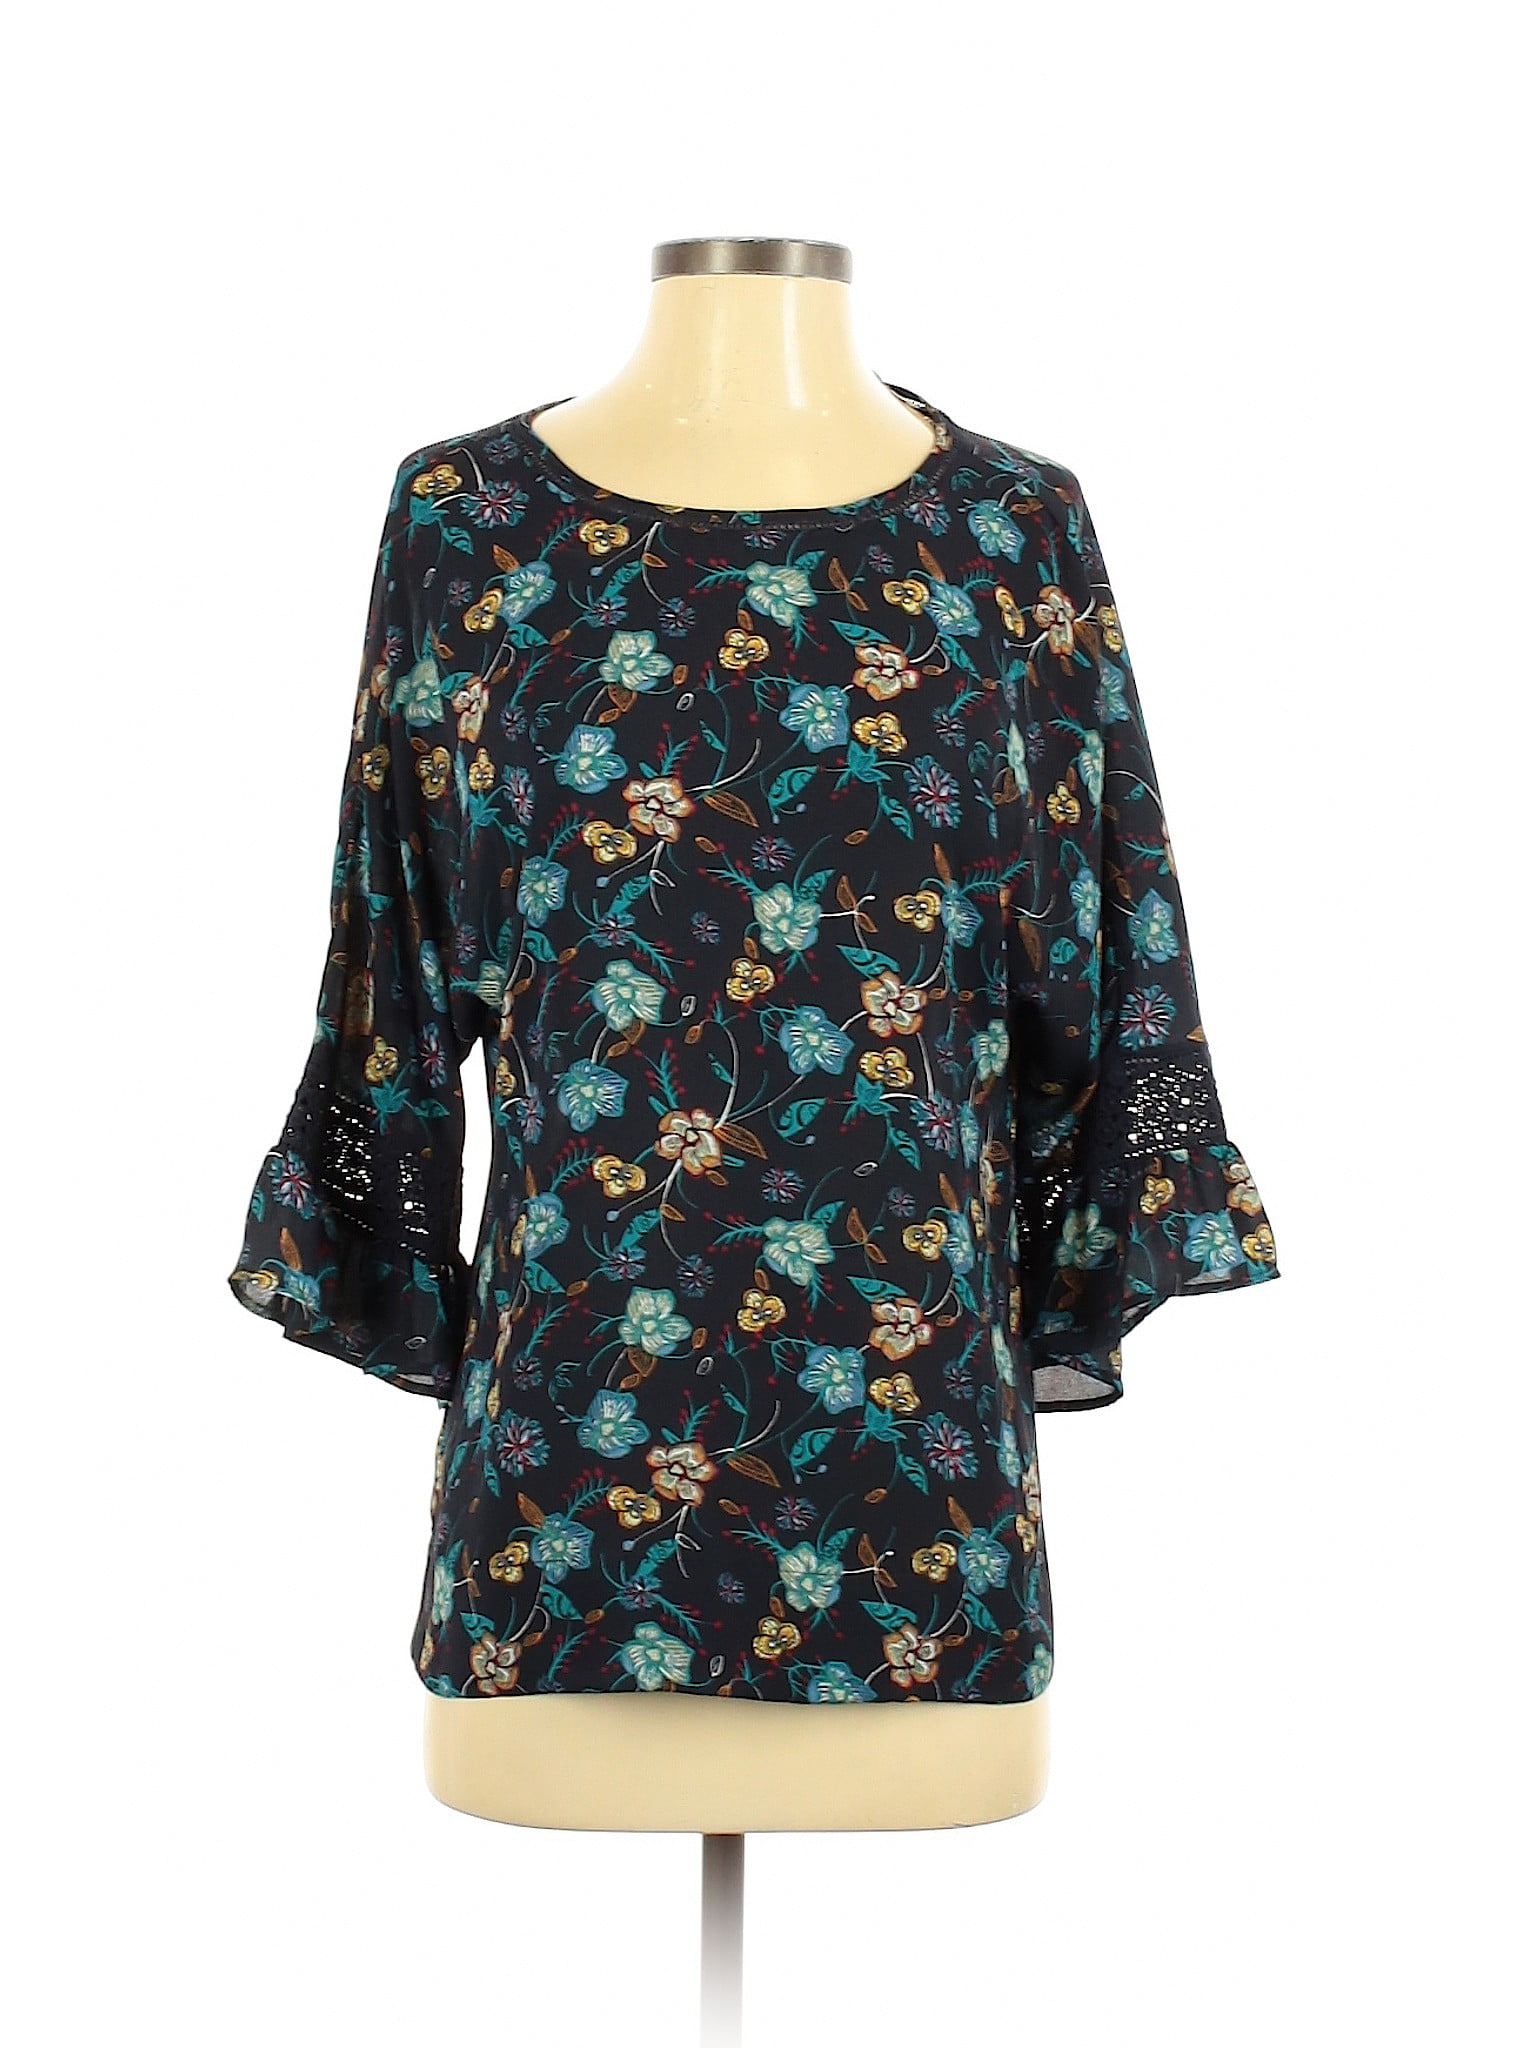 DR2 - Pre-Owned DR2 Women's Size S 3/4 Sleeve Blouse - Walmart.com ...